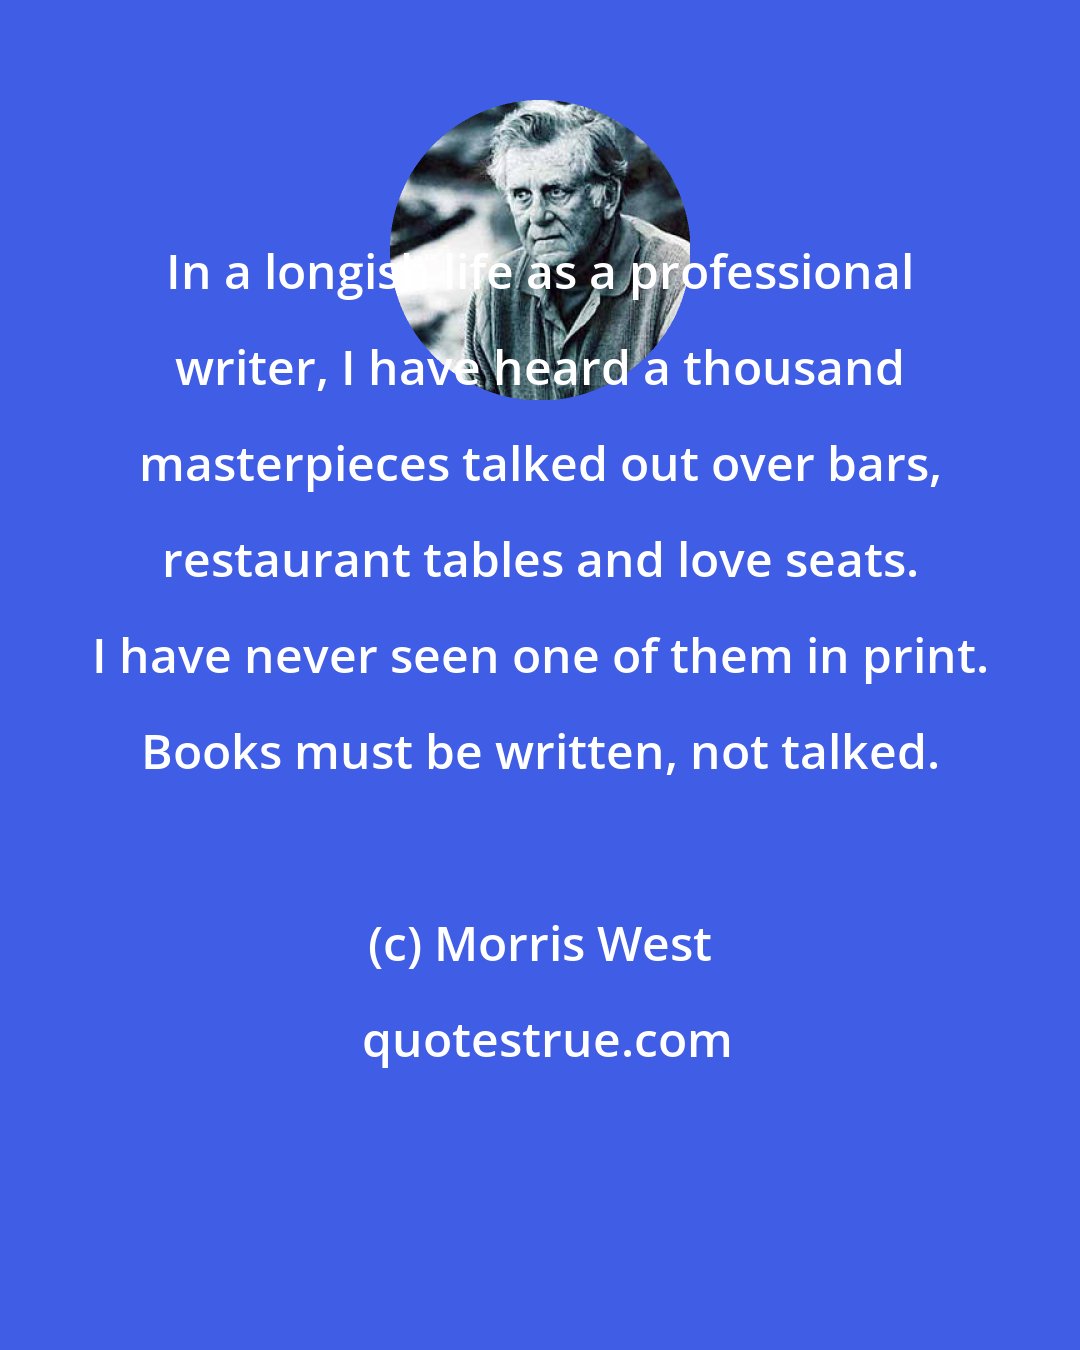 Morris West: In a longish life as a professional writer, I have heard a thousand masterpieces talked out over bars, restaurant tables and love seats. I have never seen one of them in print. Books must be written, not talked.